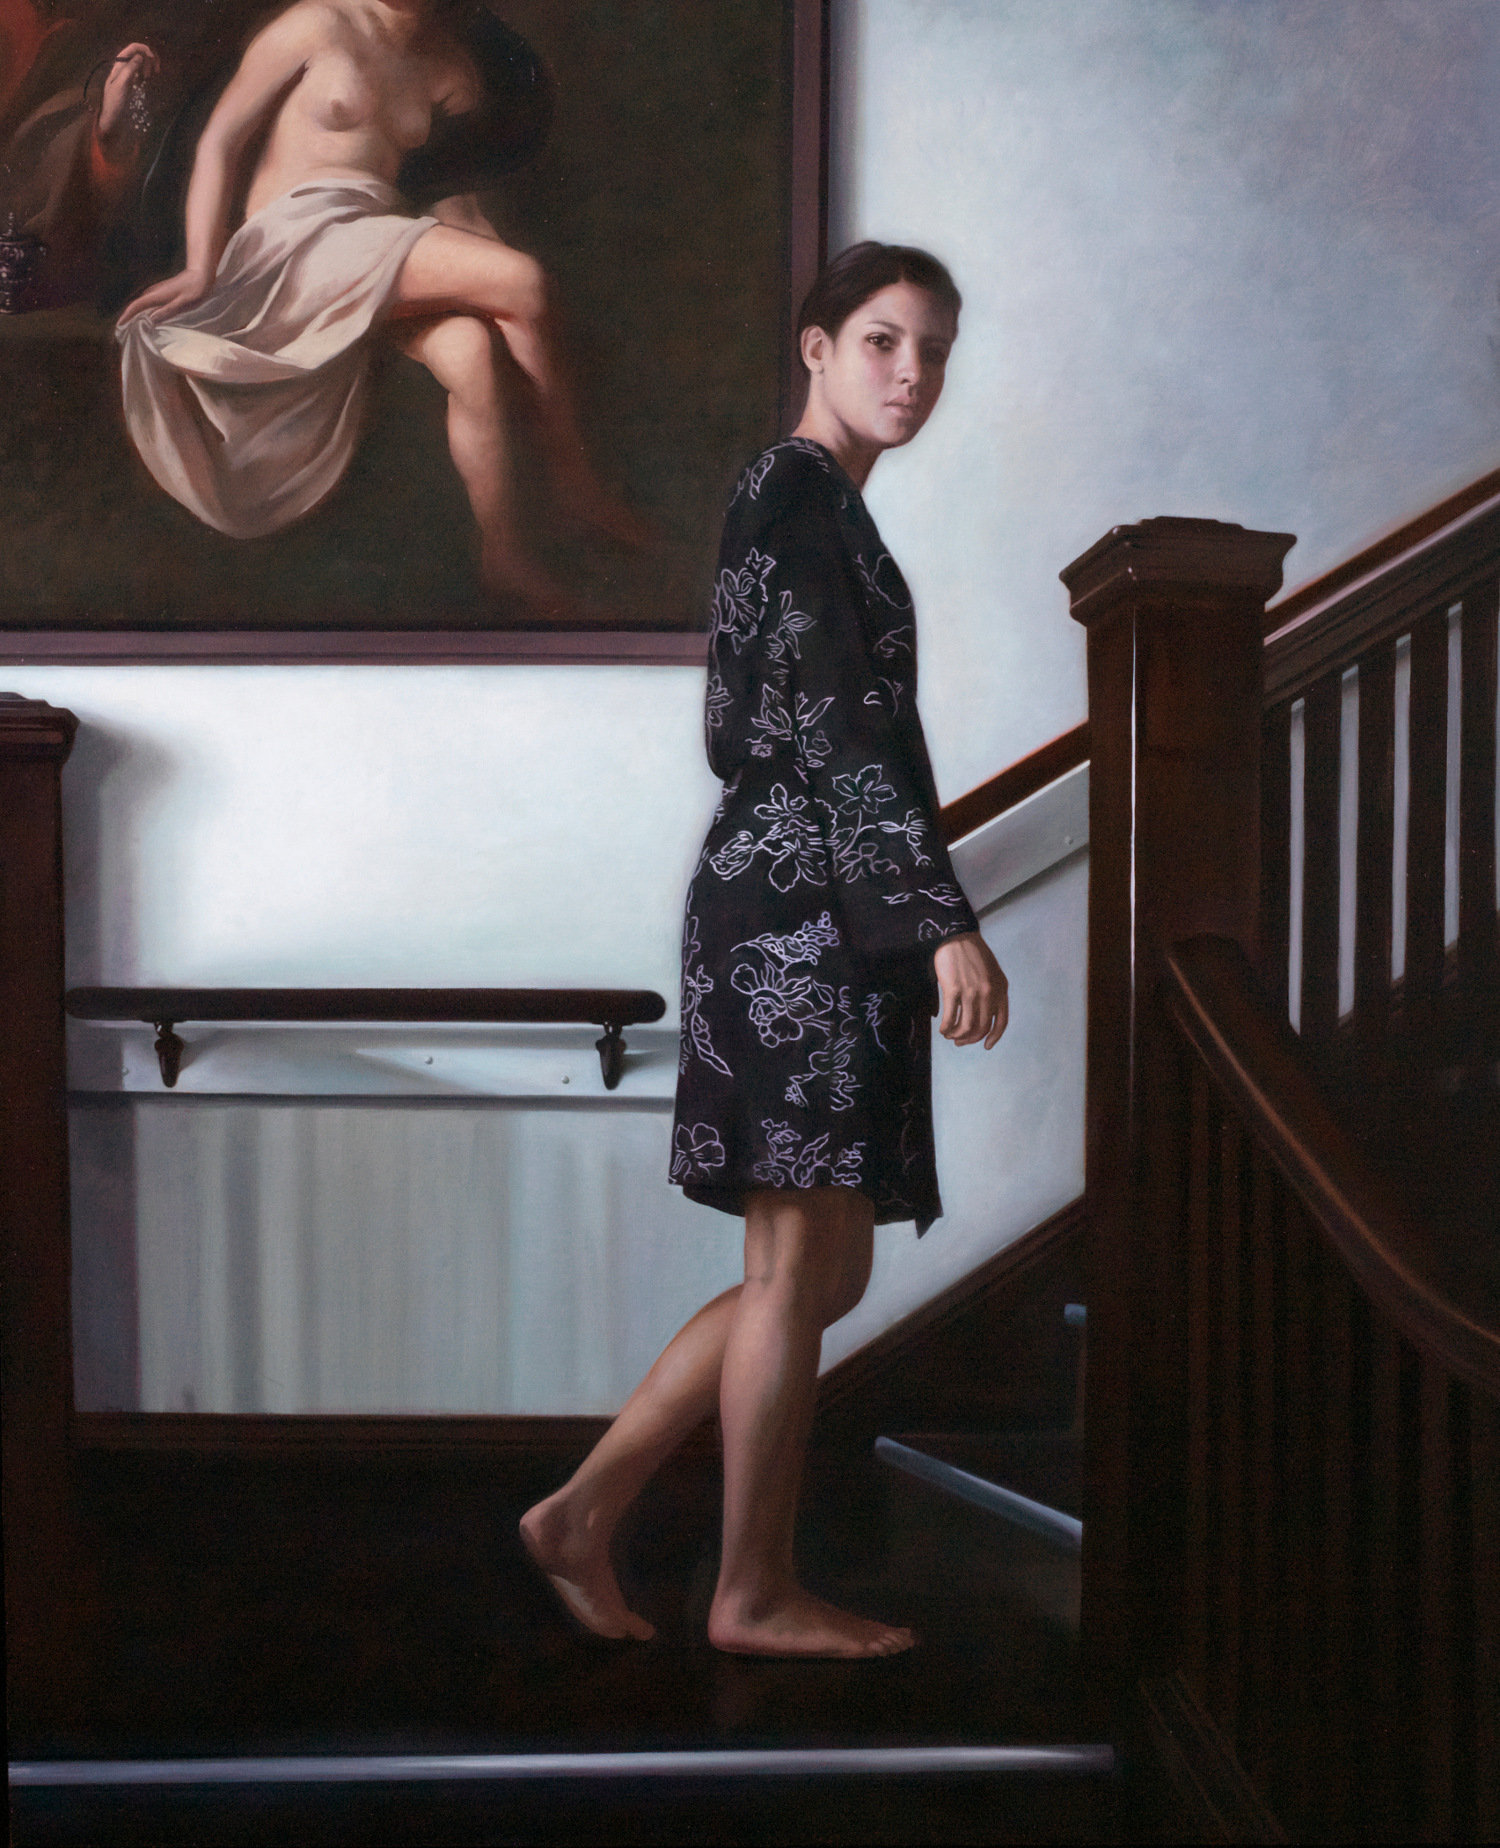   Inversion,&nbsp; 2014, Oil on linen, 32 x 26 inches, Private collection 